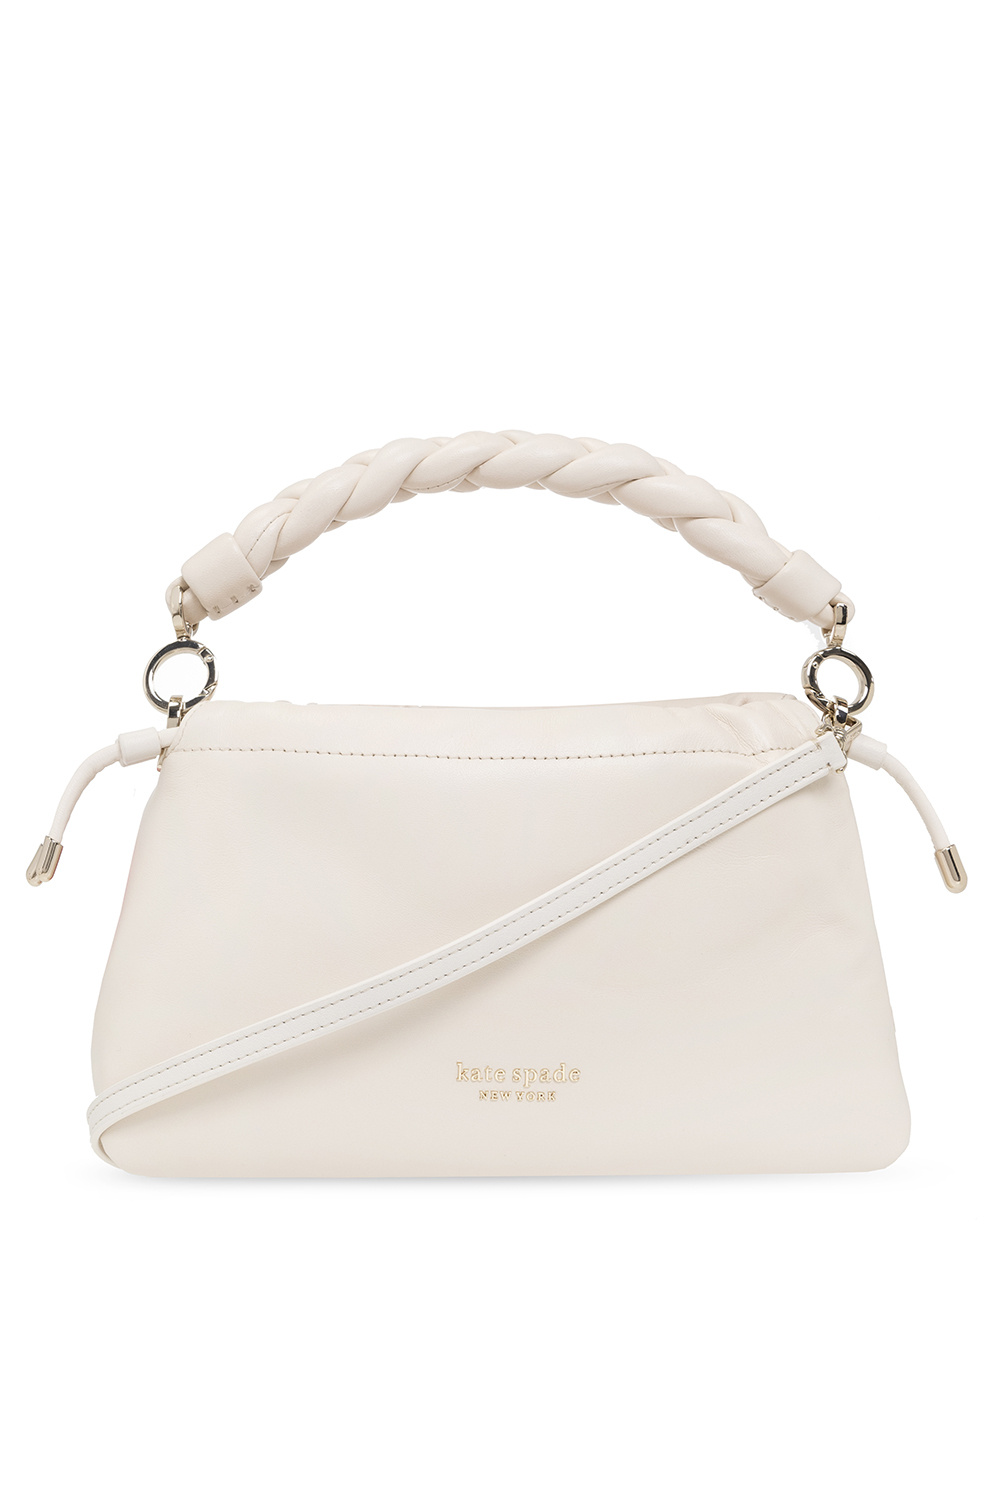 Kate Spade New York Meringue Small Nappa Leather Crossbody - Parchment